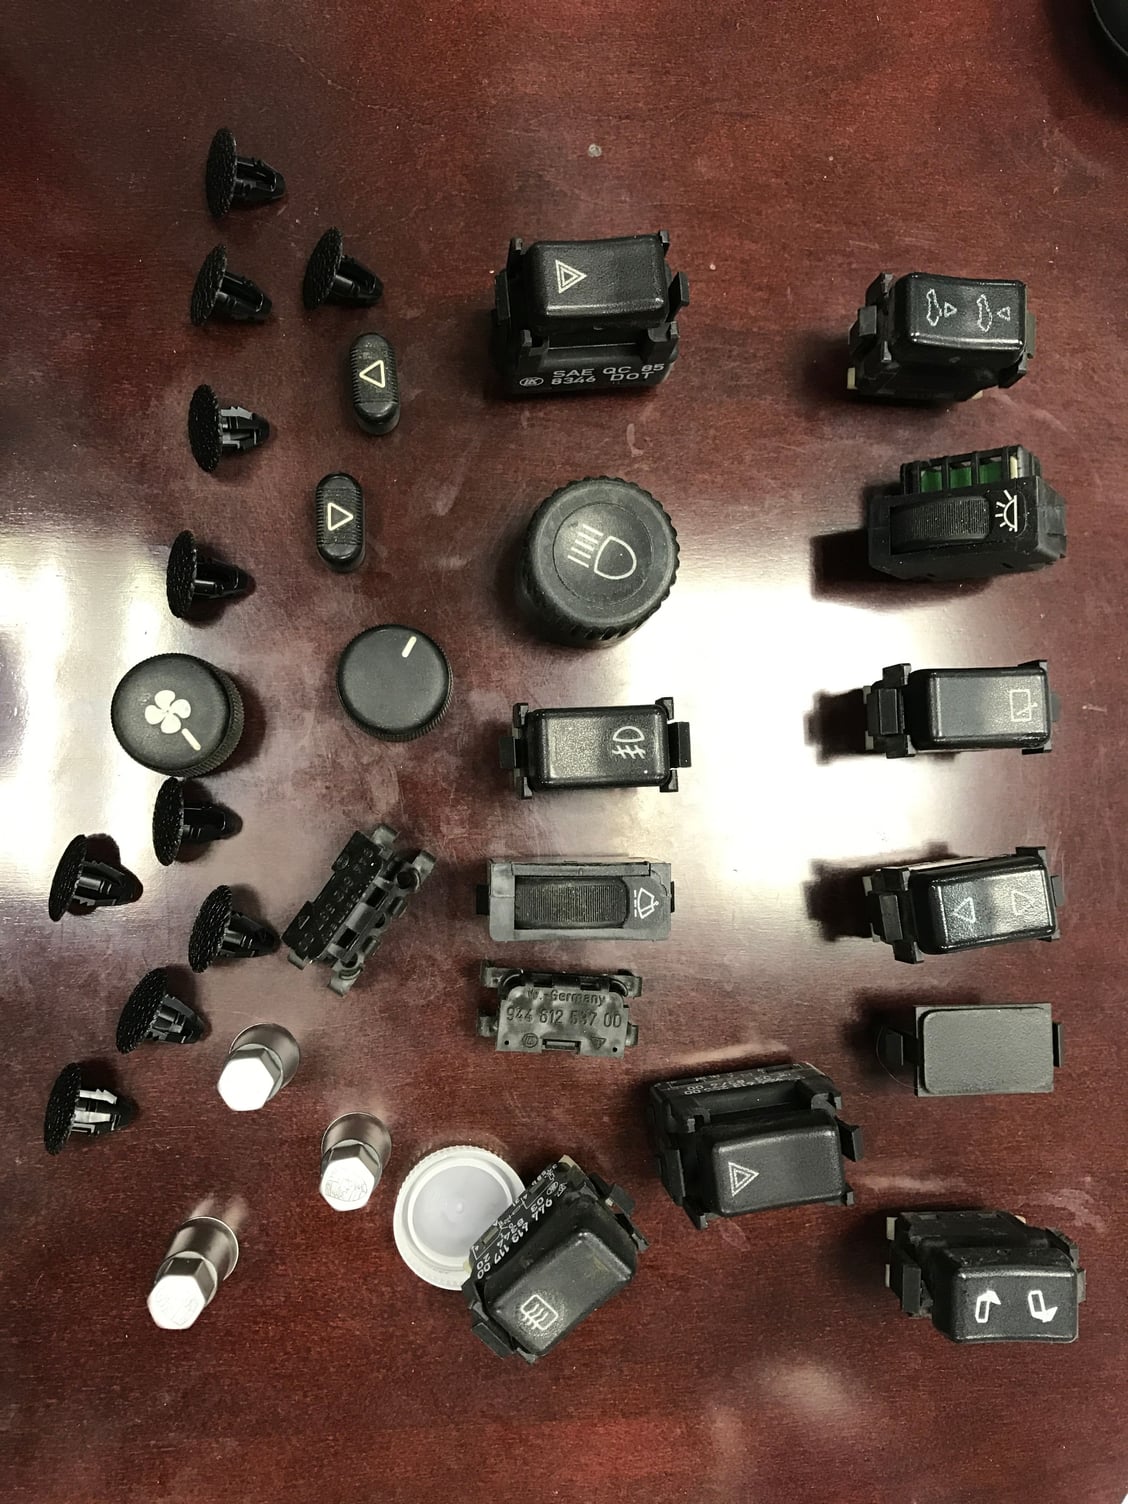 Miscellaneous - 944 brake pads sensors (new oem) and assorted switchgear (used) and interior trim pcs - New - Elizabeth, NJ 07201, United States